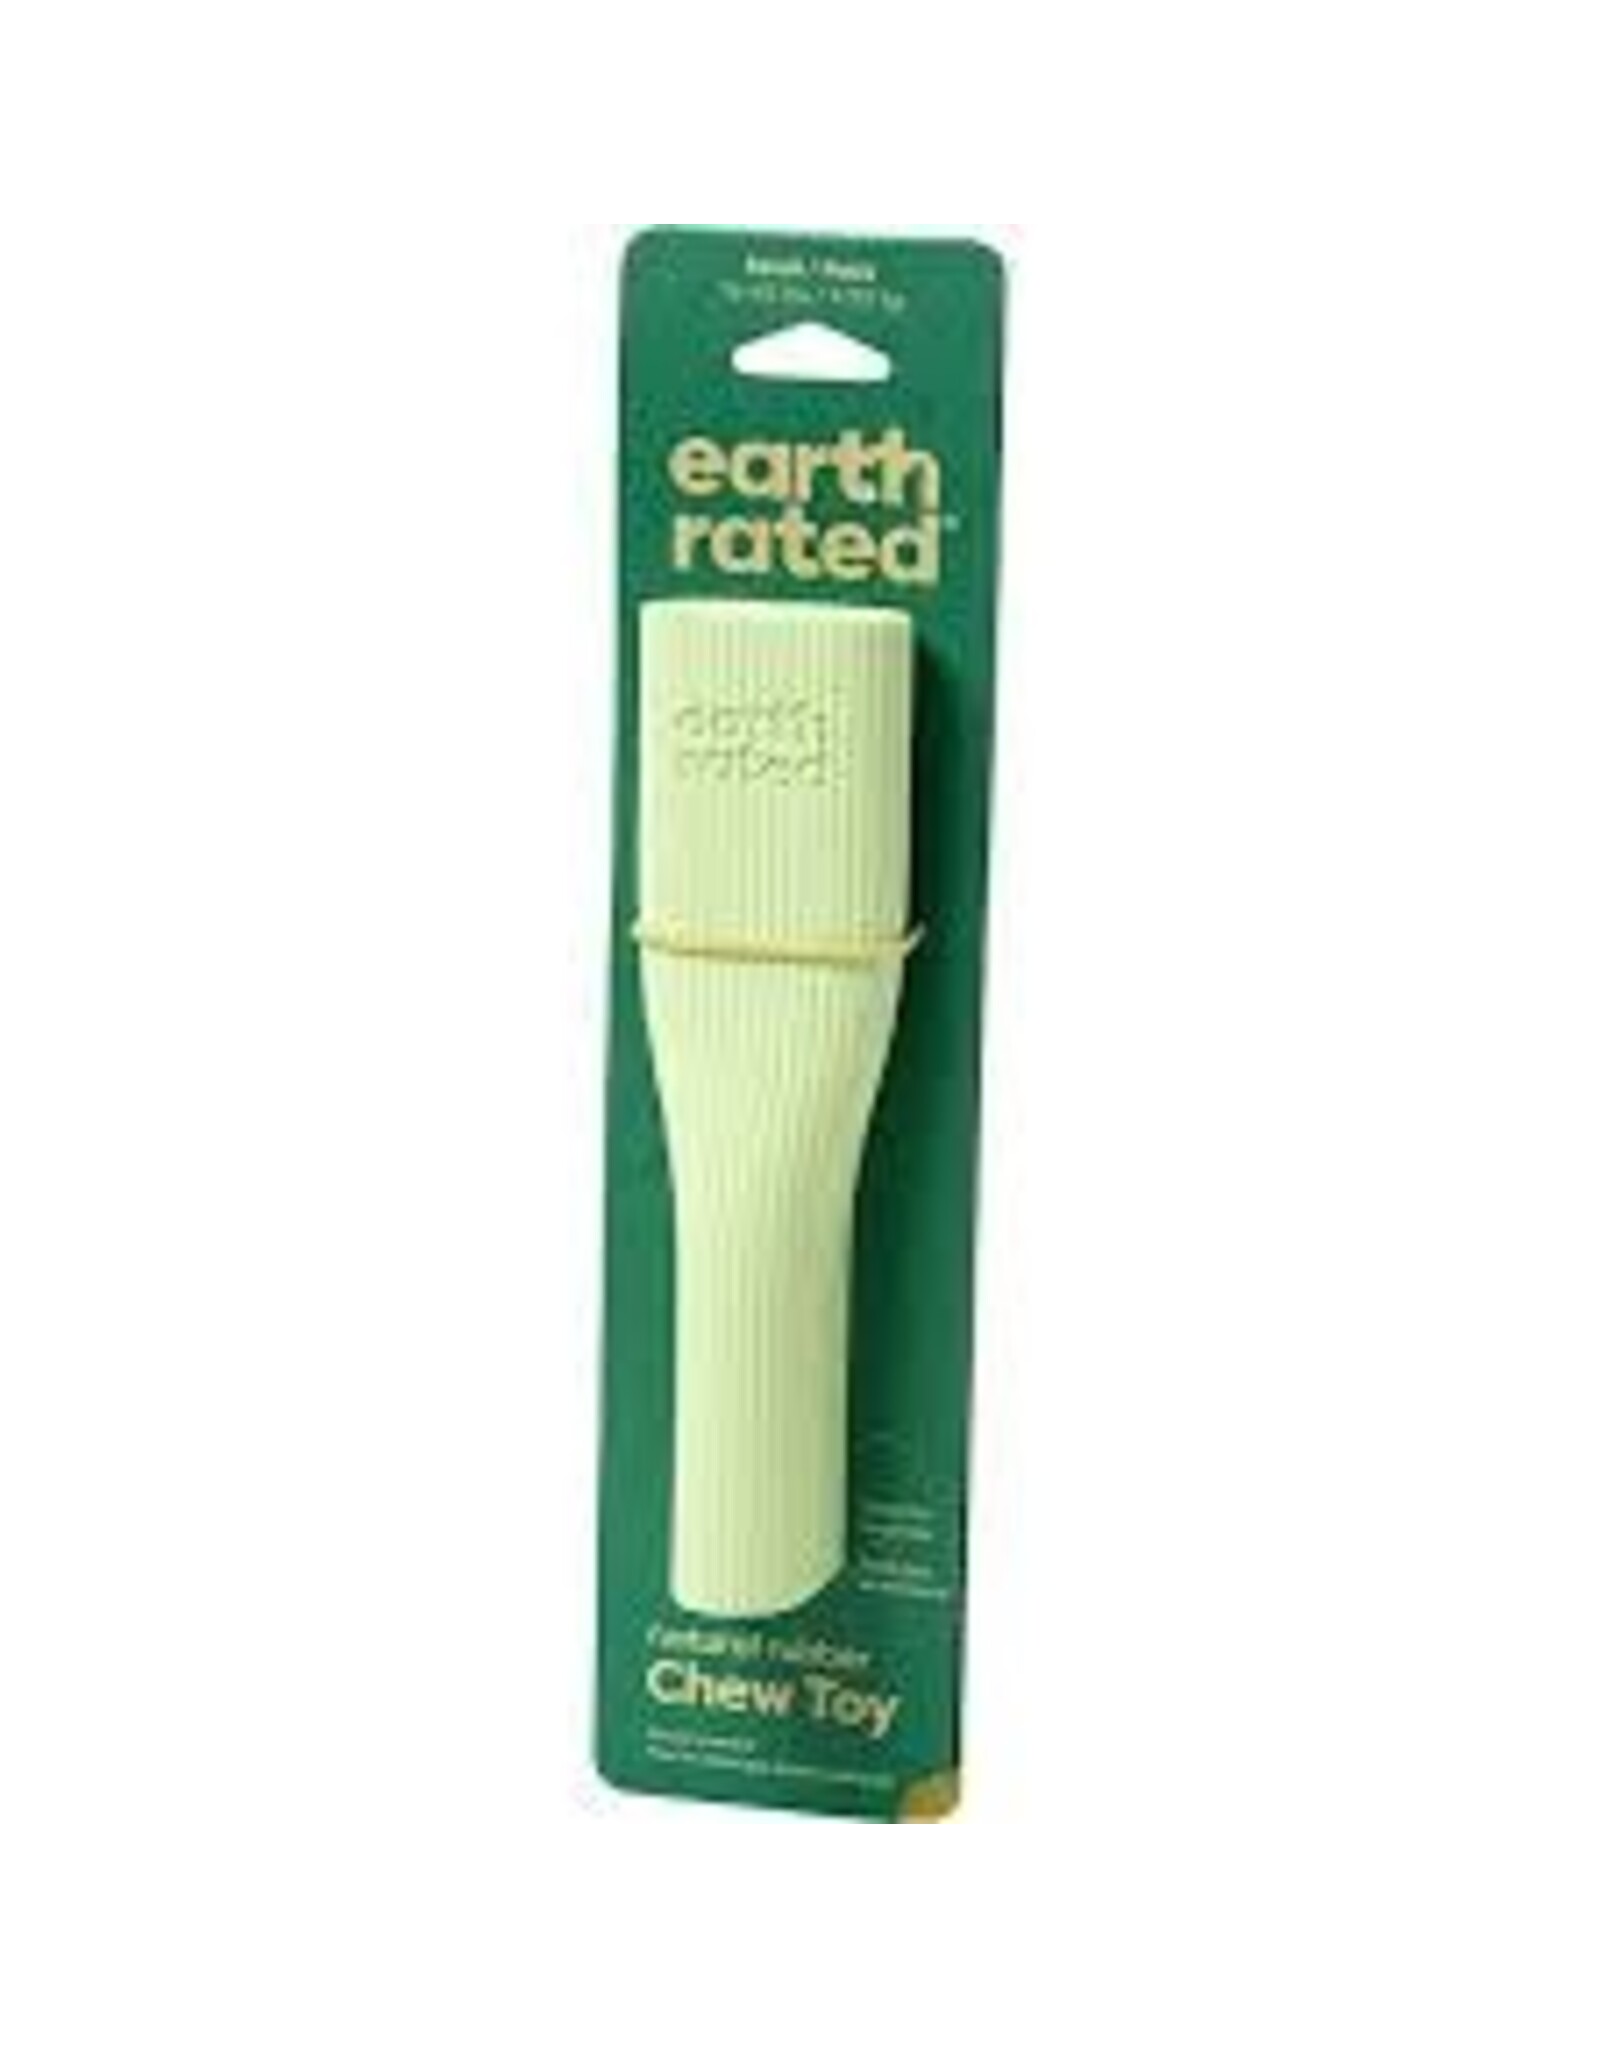 Earth Rated Earth Rated Chew Toy Green Rubber